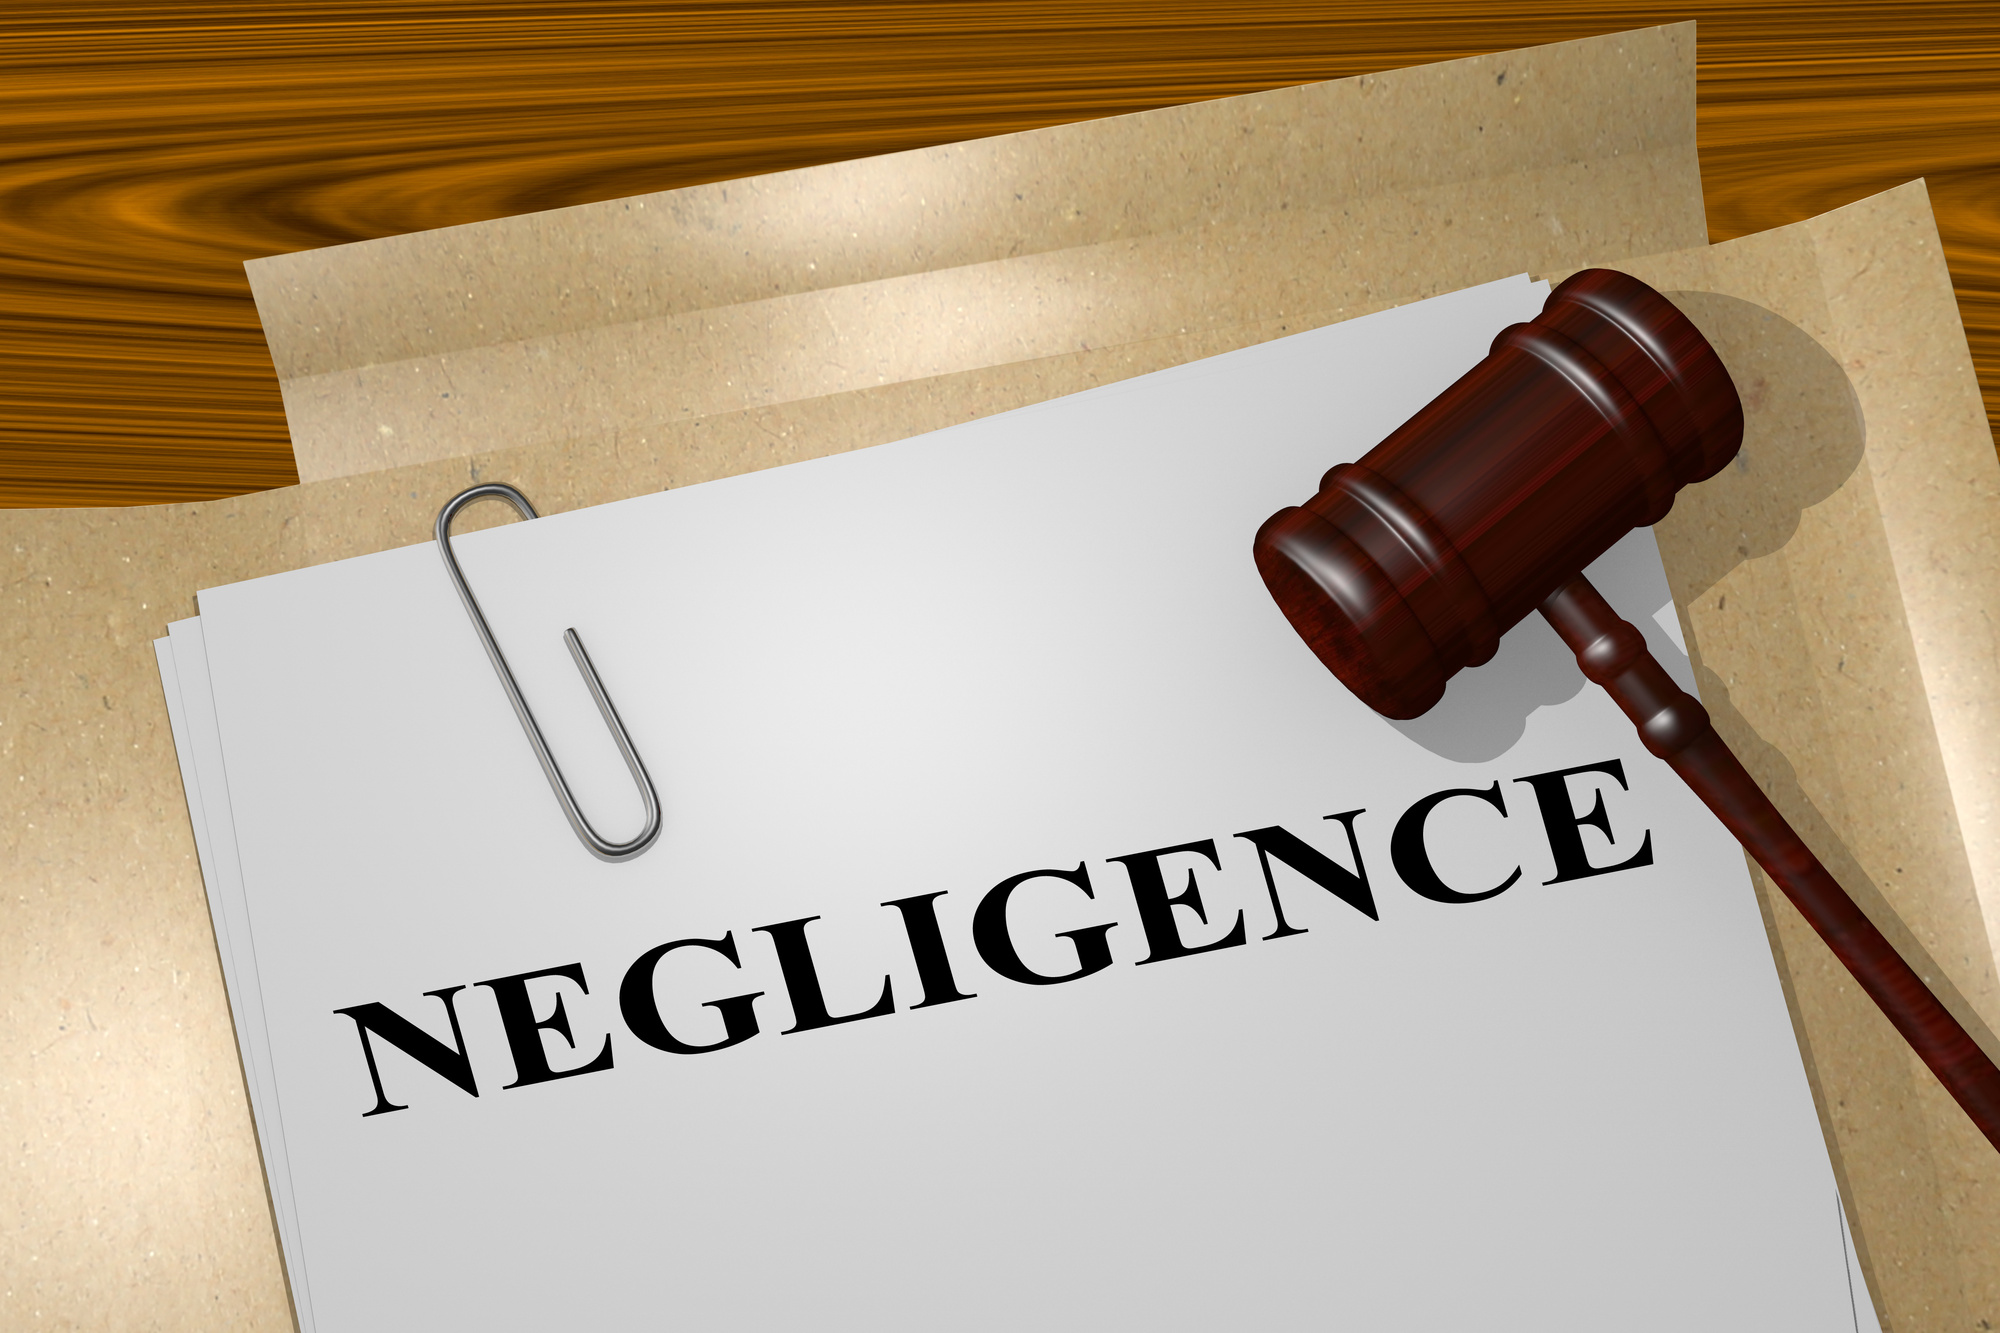 How difficult is it to prove gross negligence?